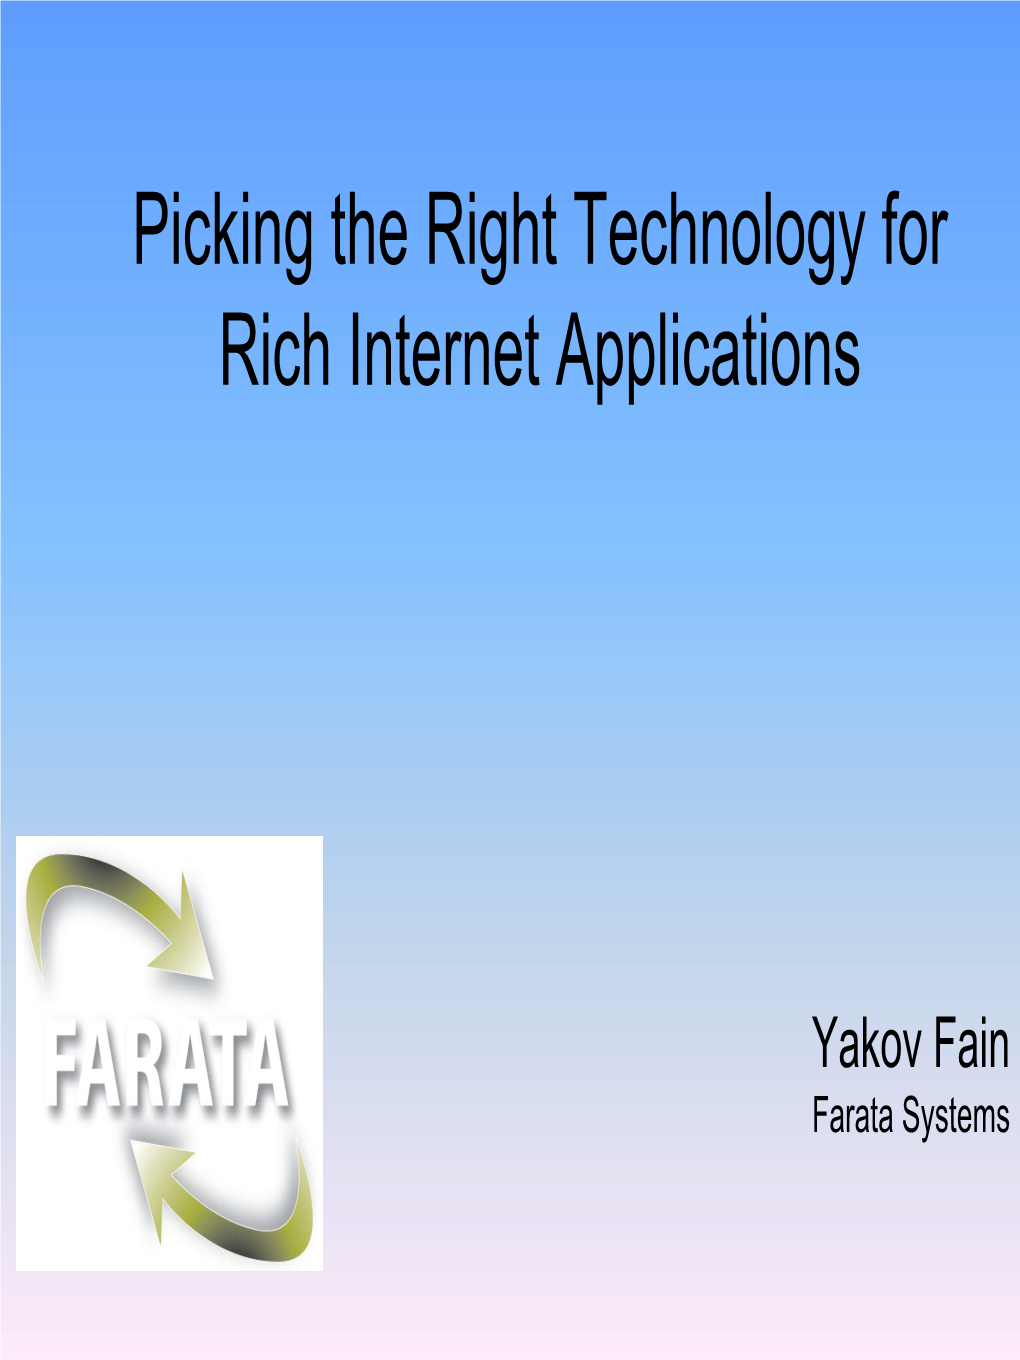 Picking the Right Technology for Rich Internet Applications